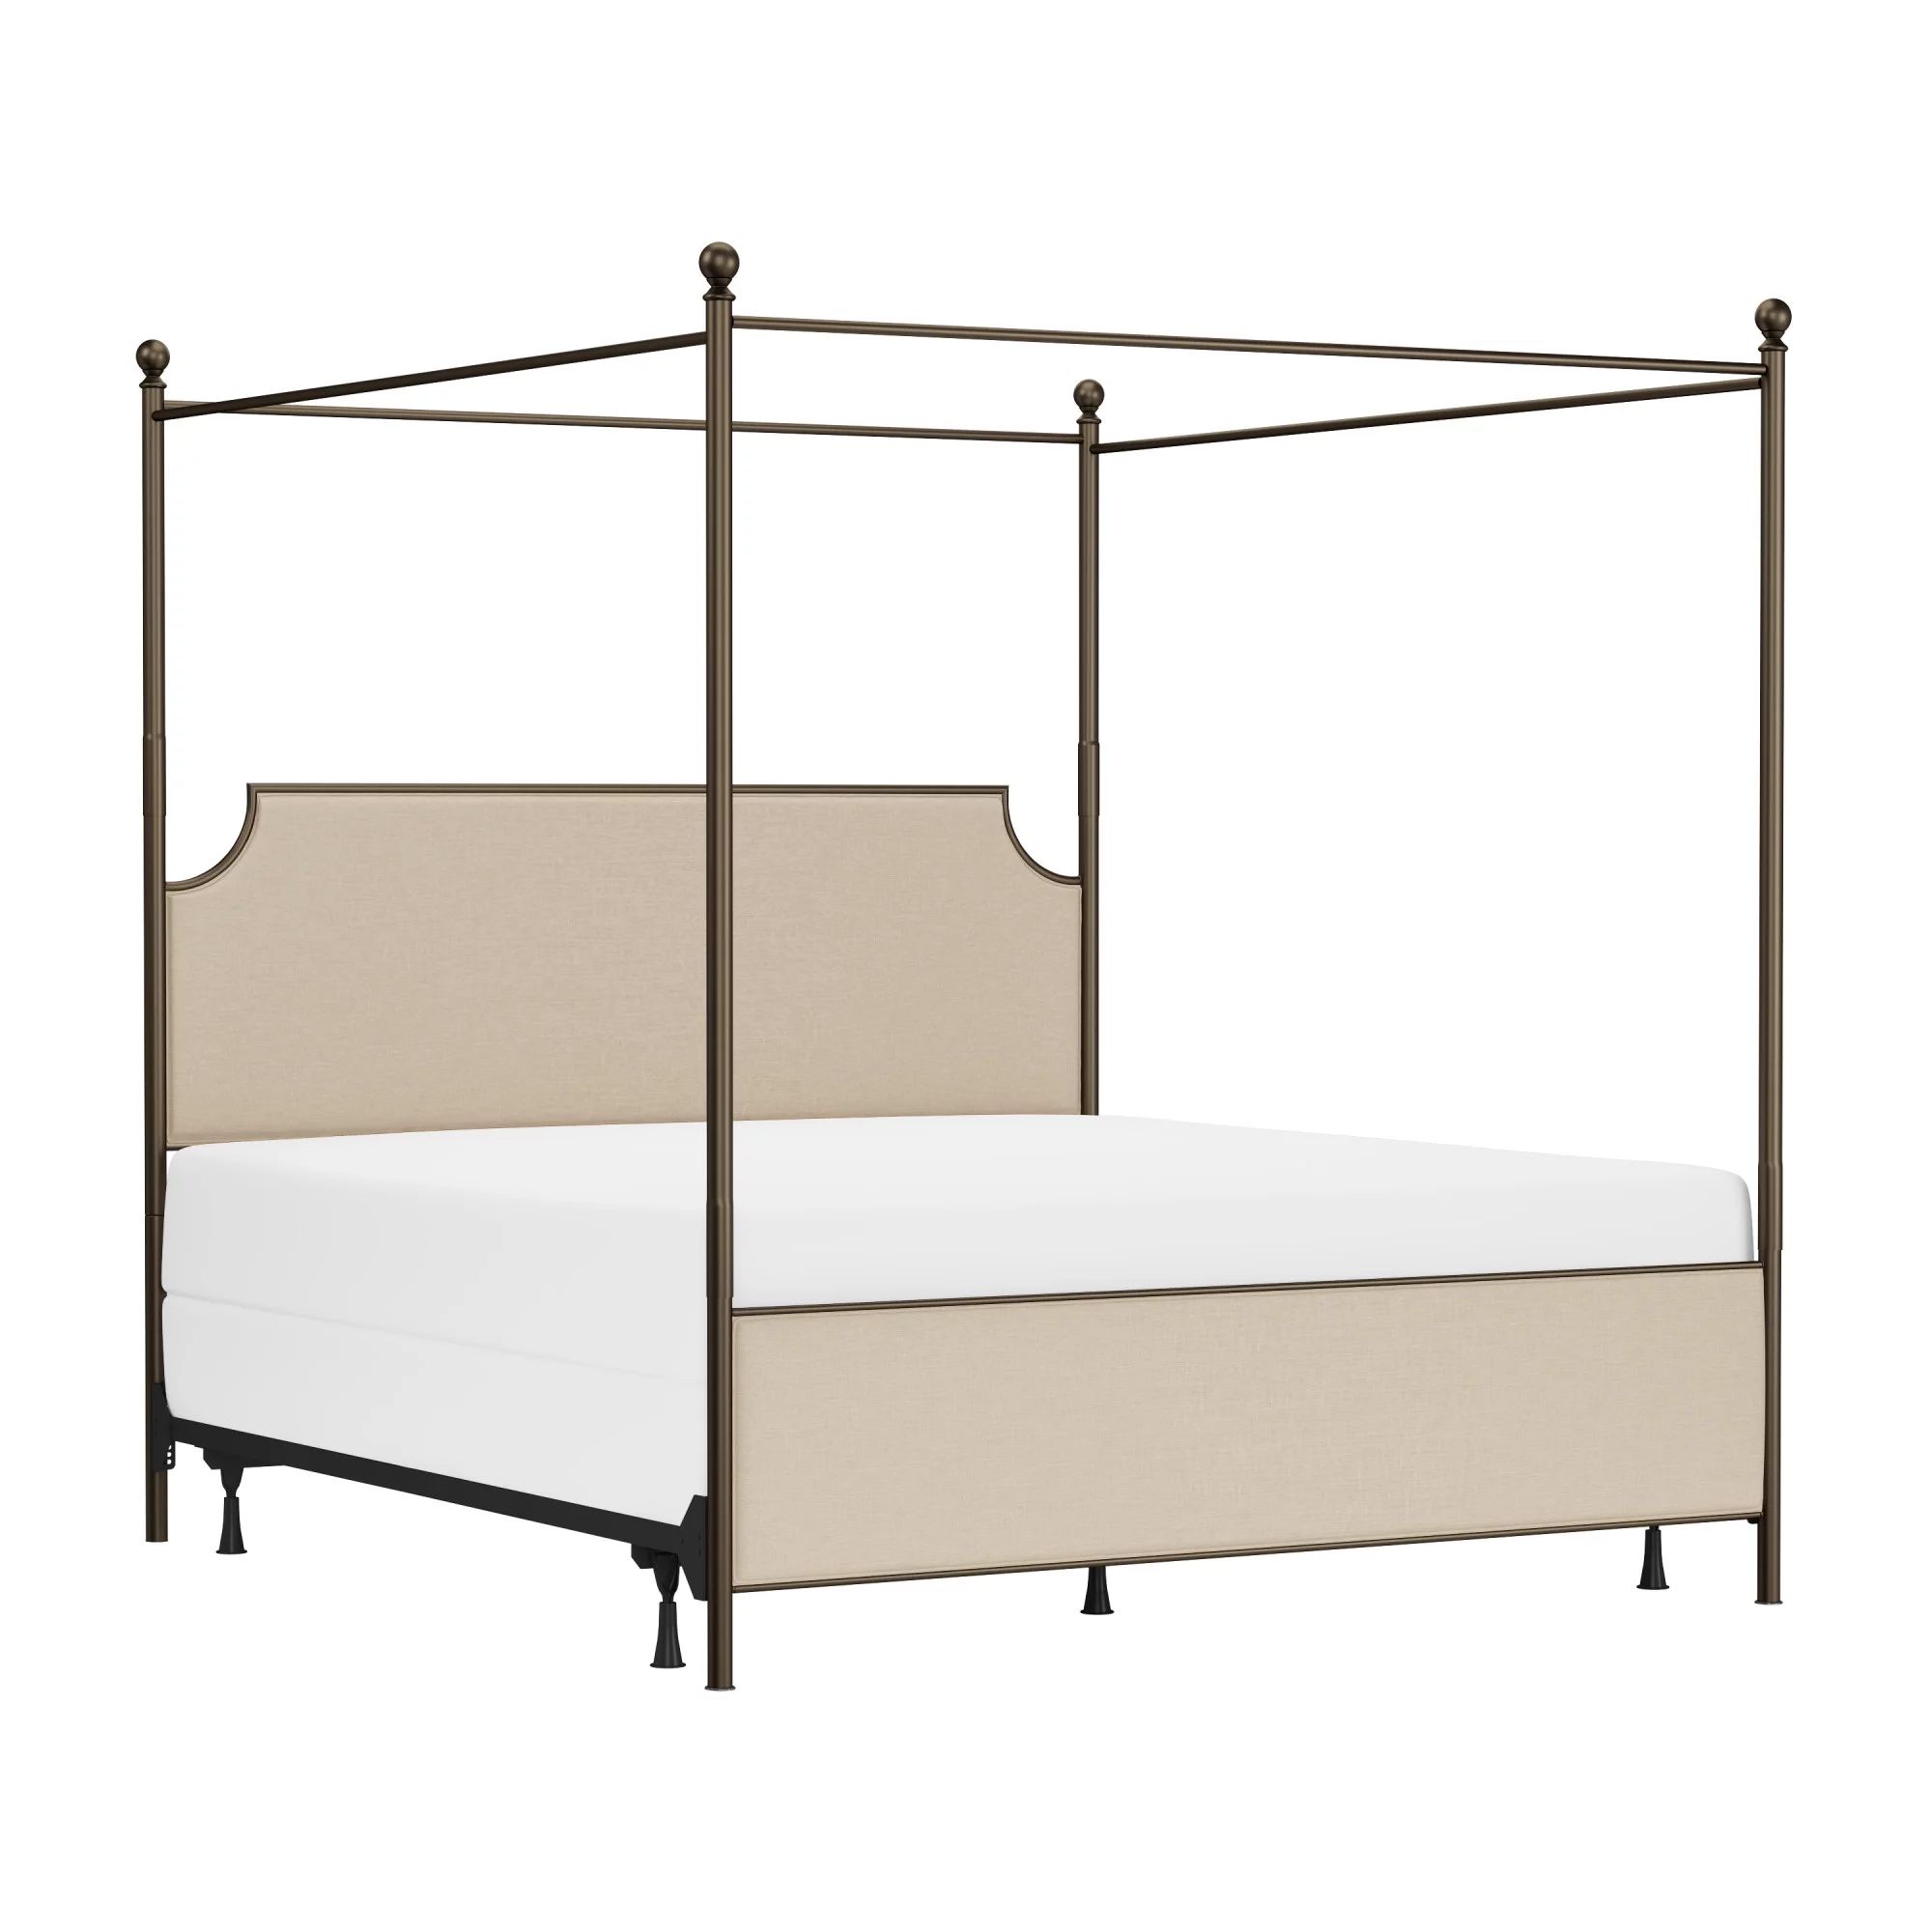 Hillsdale Furniture McArthur Metal Upholstered Canopy King Bed, Bronze with Linen | Walmart (US)